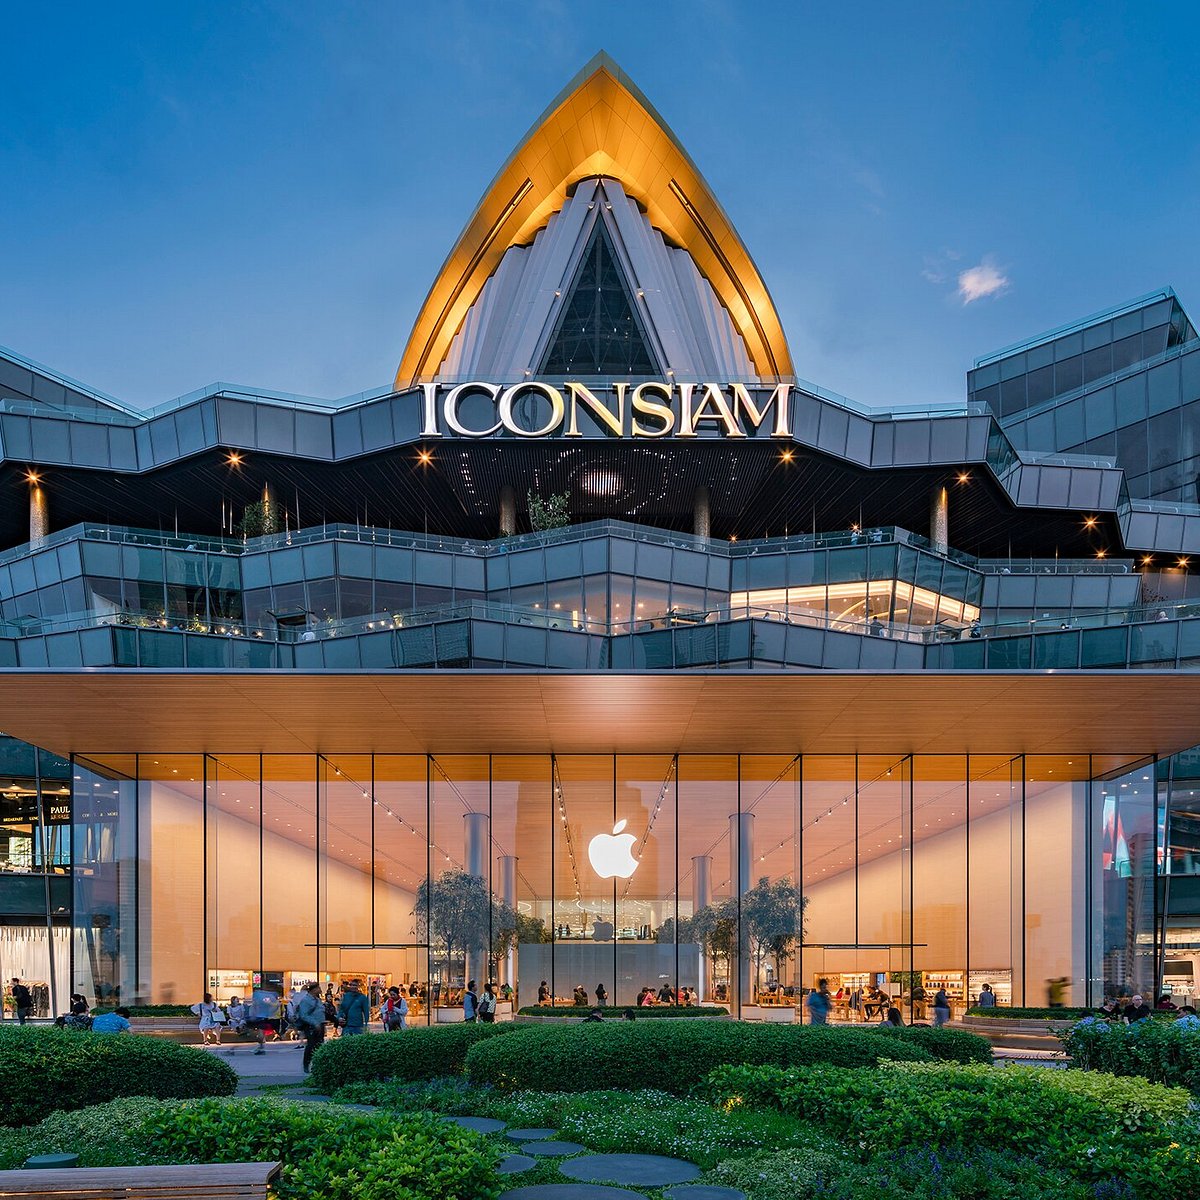 The Icon Siam Mall In Klongsan At The Chao Phraya River In The